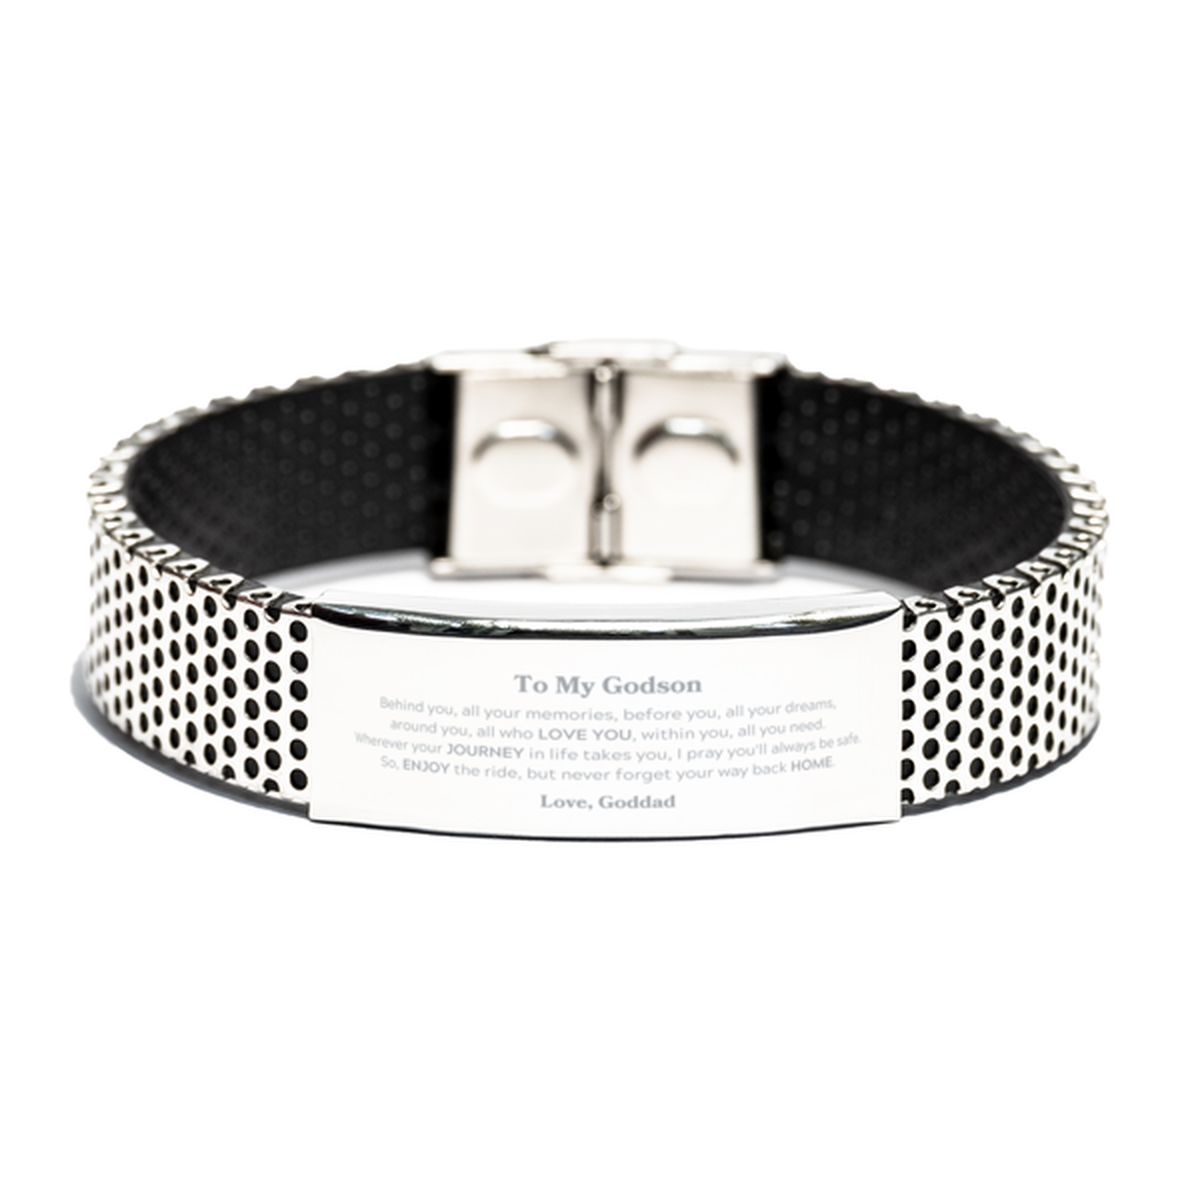 To My Godson Graduation Gifts from Goddad, Godson Stainless Steel Bracelet Christmas Birthday Gifts for Godson Behind you, all your memories, before you, all your dreams. Love, Goddad